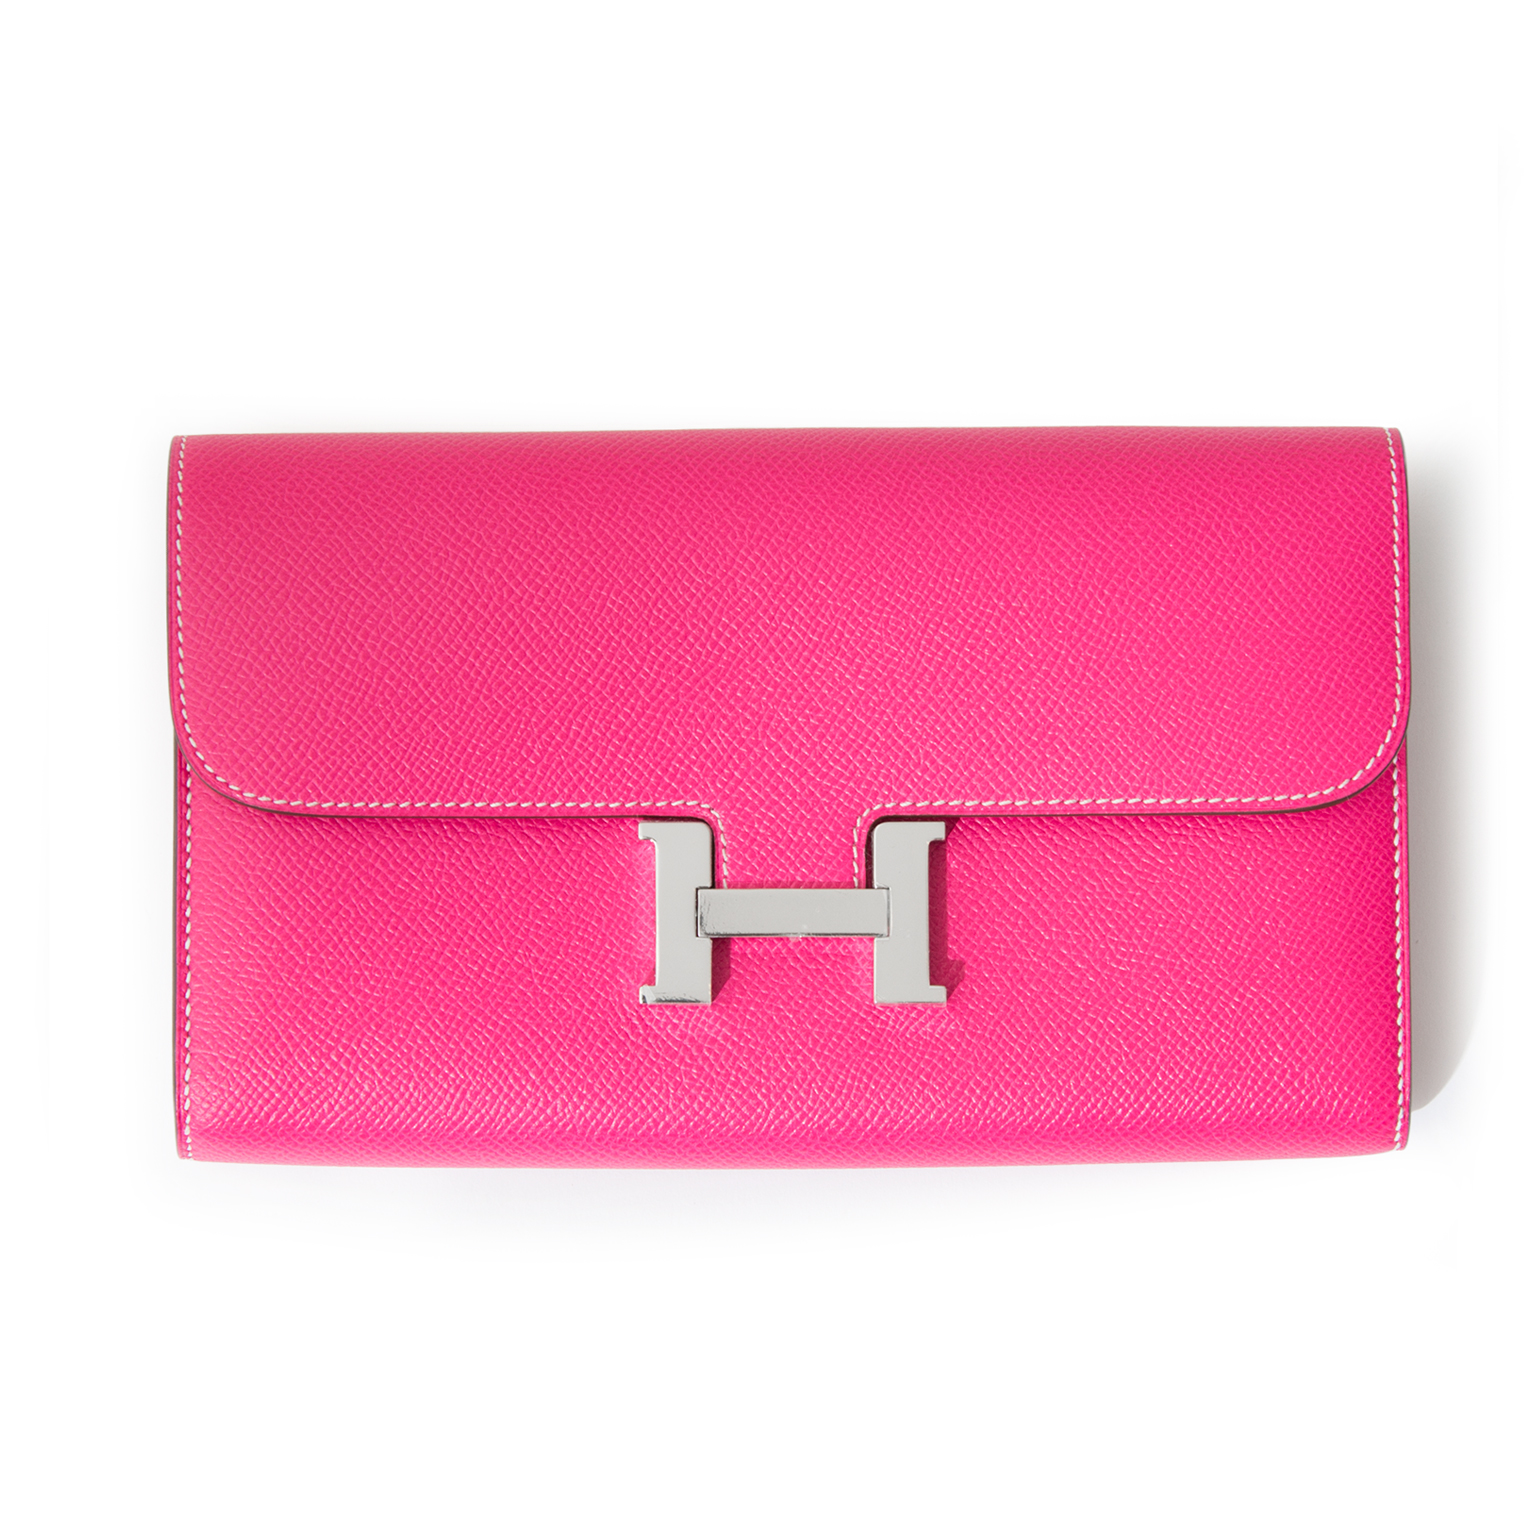 Hermès Bleu Paon Constance Long Wallet of Epsom Leather with